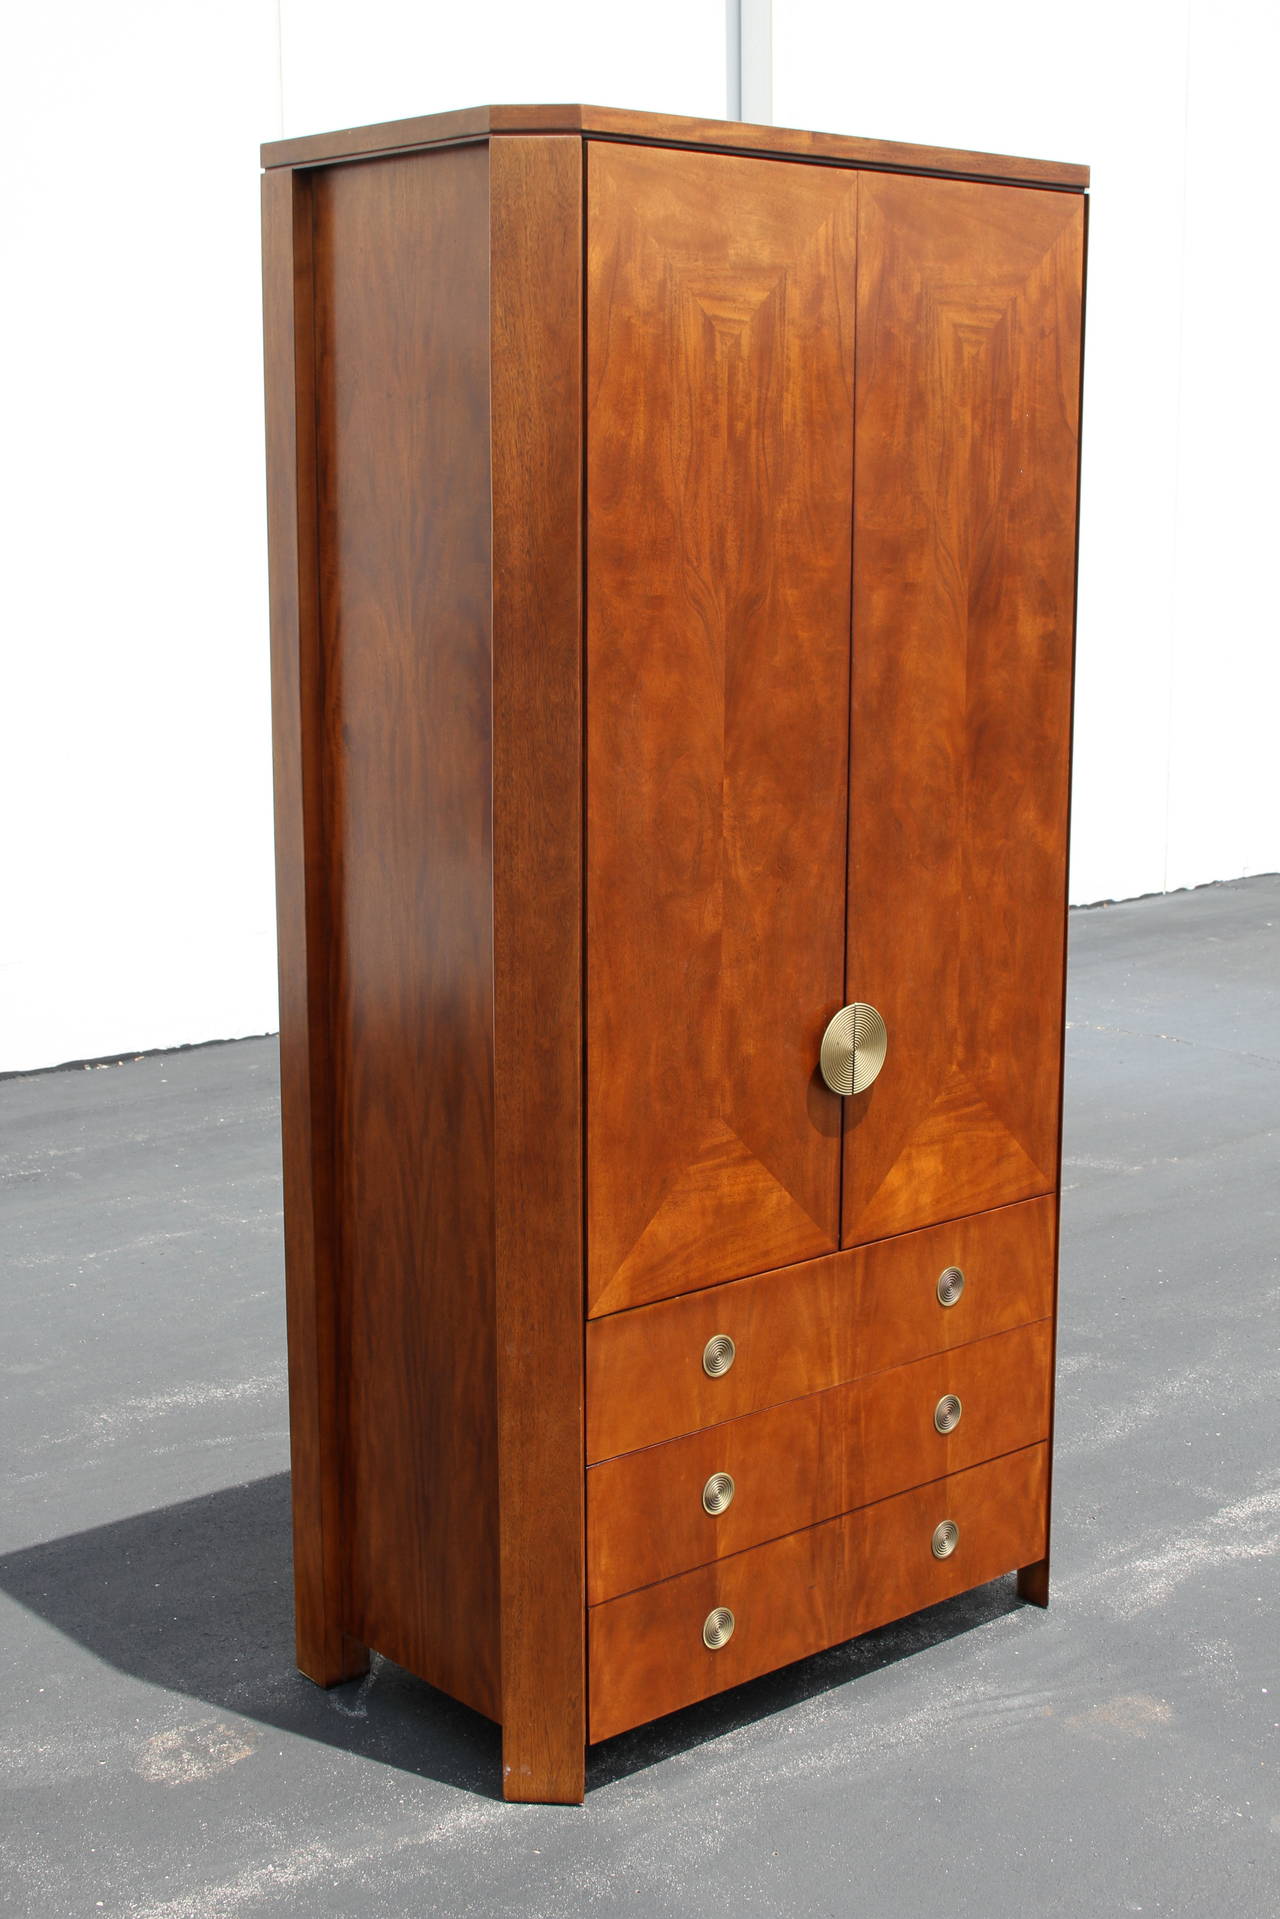 Rare tall skyscraper form Armoire designed by Charles Pfister for Baker, with cabinet doors above three drawers, all with concentric Art Deco styling brass circular hardware, circa 1989. Primavera mahogany in a medium brown tone. Better photos